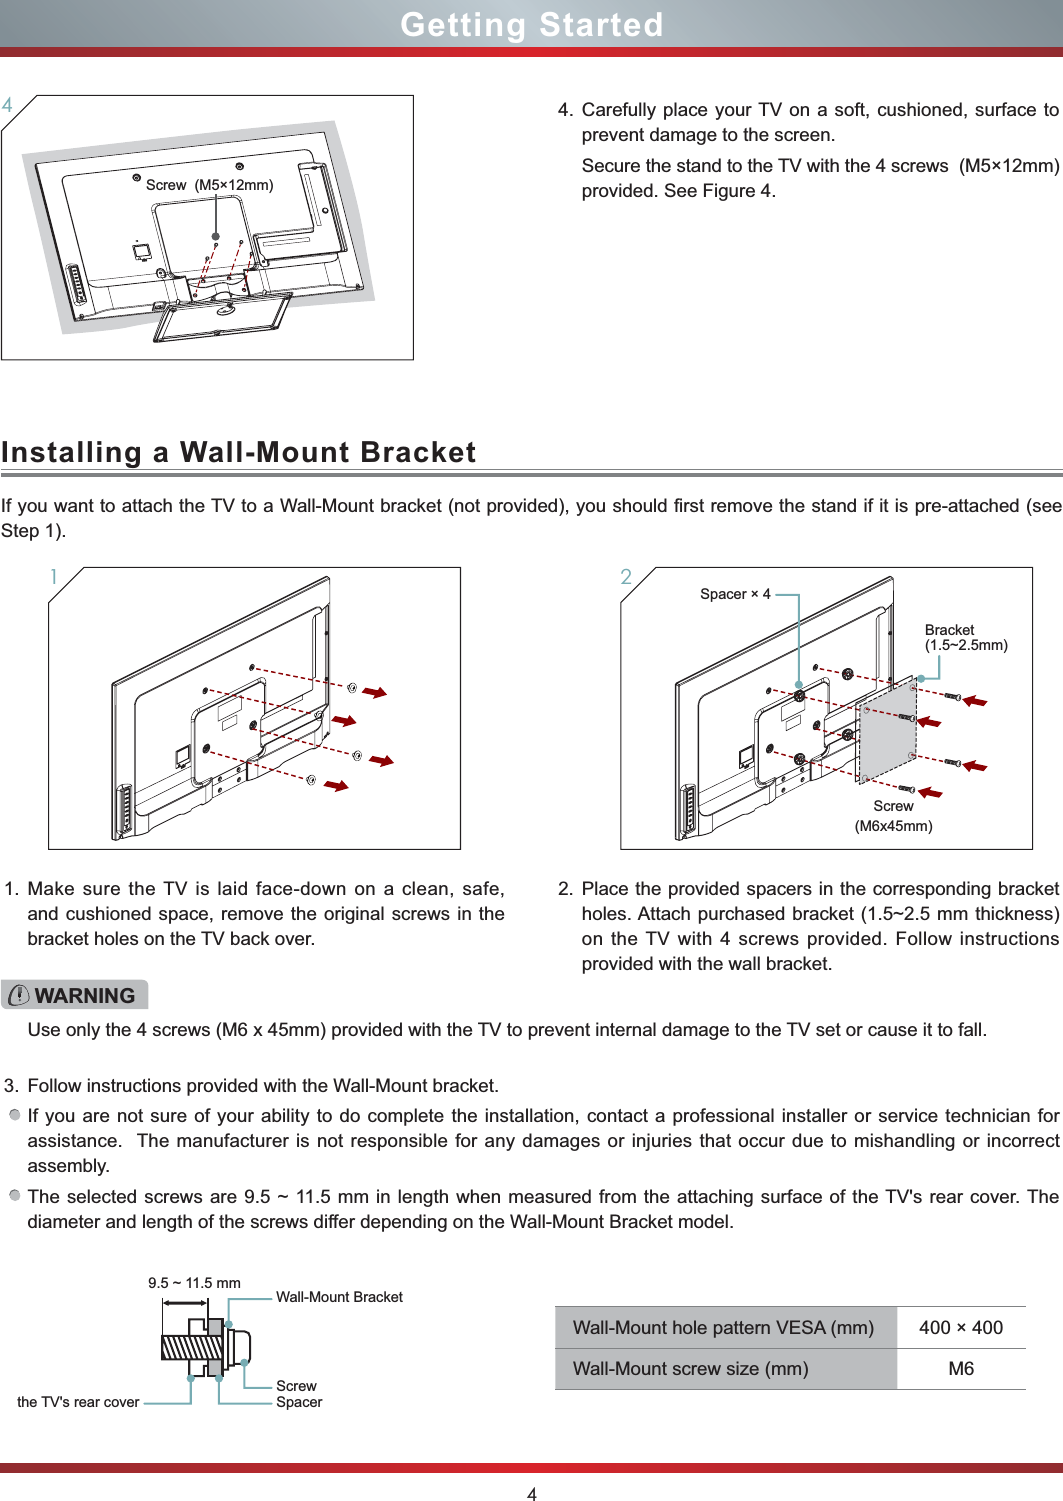 4Getting StartedInstalling a Wall-Mount Bracket4. Carefully place your TV on a soft, cushioned, surface to prevent damage to the screen.Secure the stand to the TV with the 4 screws  (M5×12mm) provided. See Figure 4.4Screw  (M5×12mm)If you want to attach the TV to a Wall-Mount bracket (not provided), you should first remove the stand if it is pre-attached (see Step 1).1. Make sure the TV is laid face-down on a clean, safe, and cushioned space, remove the original screws in the bracket holes on the TV back over.3. Follow instructions provided with the Wall-Mount bracket.If you are not sure of your ability to do complete the installation, contact a professional installer or service technician for assistance.  The manufacturer is not responsible for any damages or injuries that occur due to mishandling or incorrect assembly.The selected screws are 9.5 ~ 11.5 mm in length when measured from the attaching surface of the TV&apos;s rear cover. The diameter and length of the screws differ depending on the Wall-Mount Bracket model.2. Place the provided spacers in the corresponding bracket  holes. Attach purchased bracket (1.5~2.5 mm thickness) on the TV with 4 screws provided. Follow instructions provided with the wall bracket.1WARNINGUse only the 4 screws (M6 x 45mm) provided with the TV to prevent internal damage to the TV set or cause it to fall.Wall-Mount Bracket9.5 ~ 11.5 mmScrewSpacerthe TV&apos;s rear coverWall-Mount hole pattern VESA (mm) 400 × 400Wall-Mount screw size (mm) M6Screw(M6x45mm)2Spacer × 4Bracket(1.5~2.5mm)